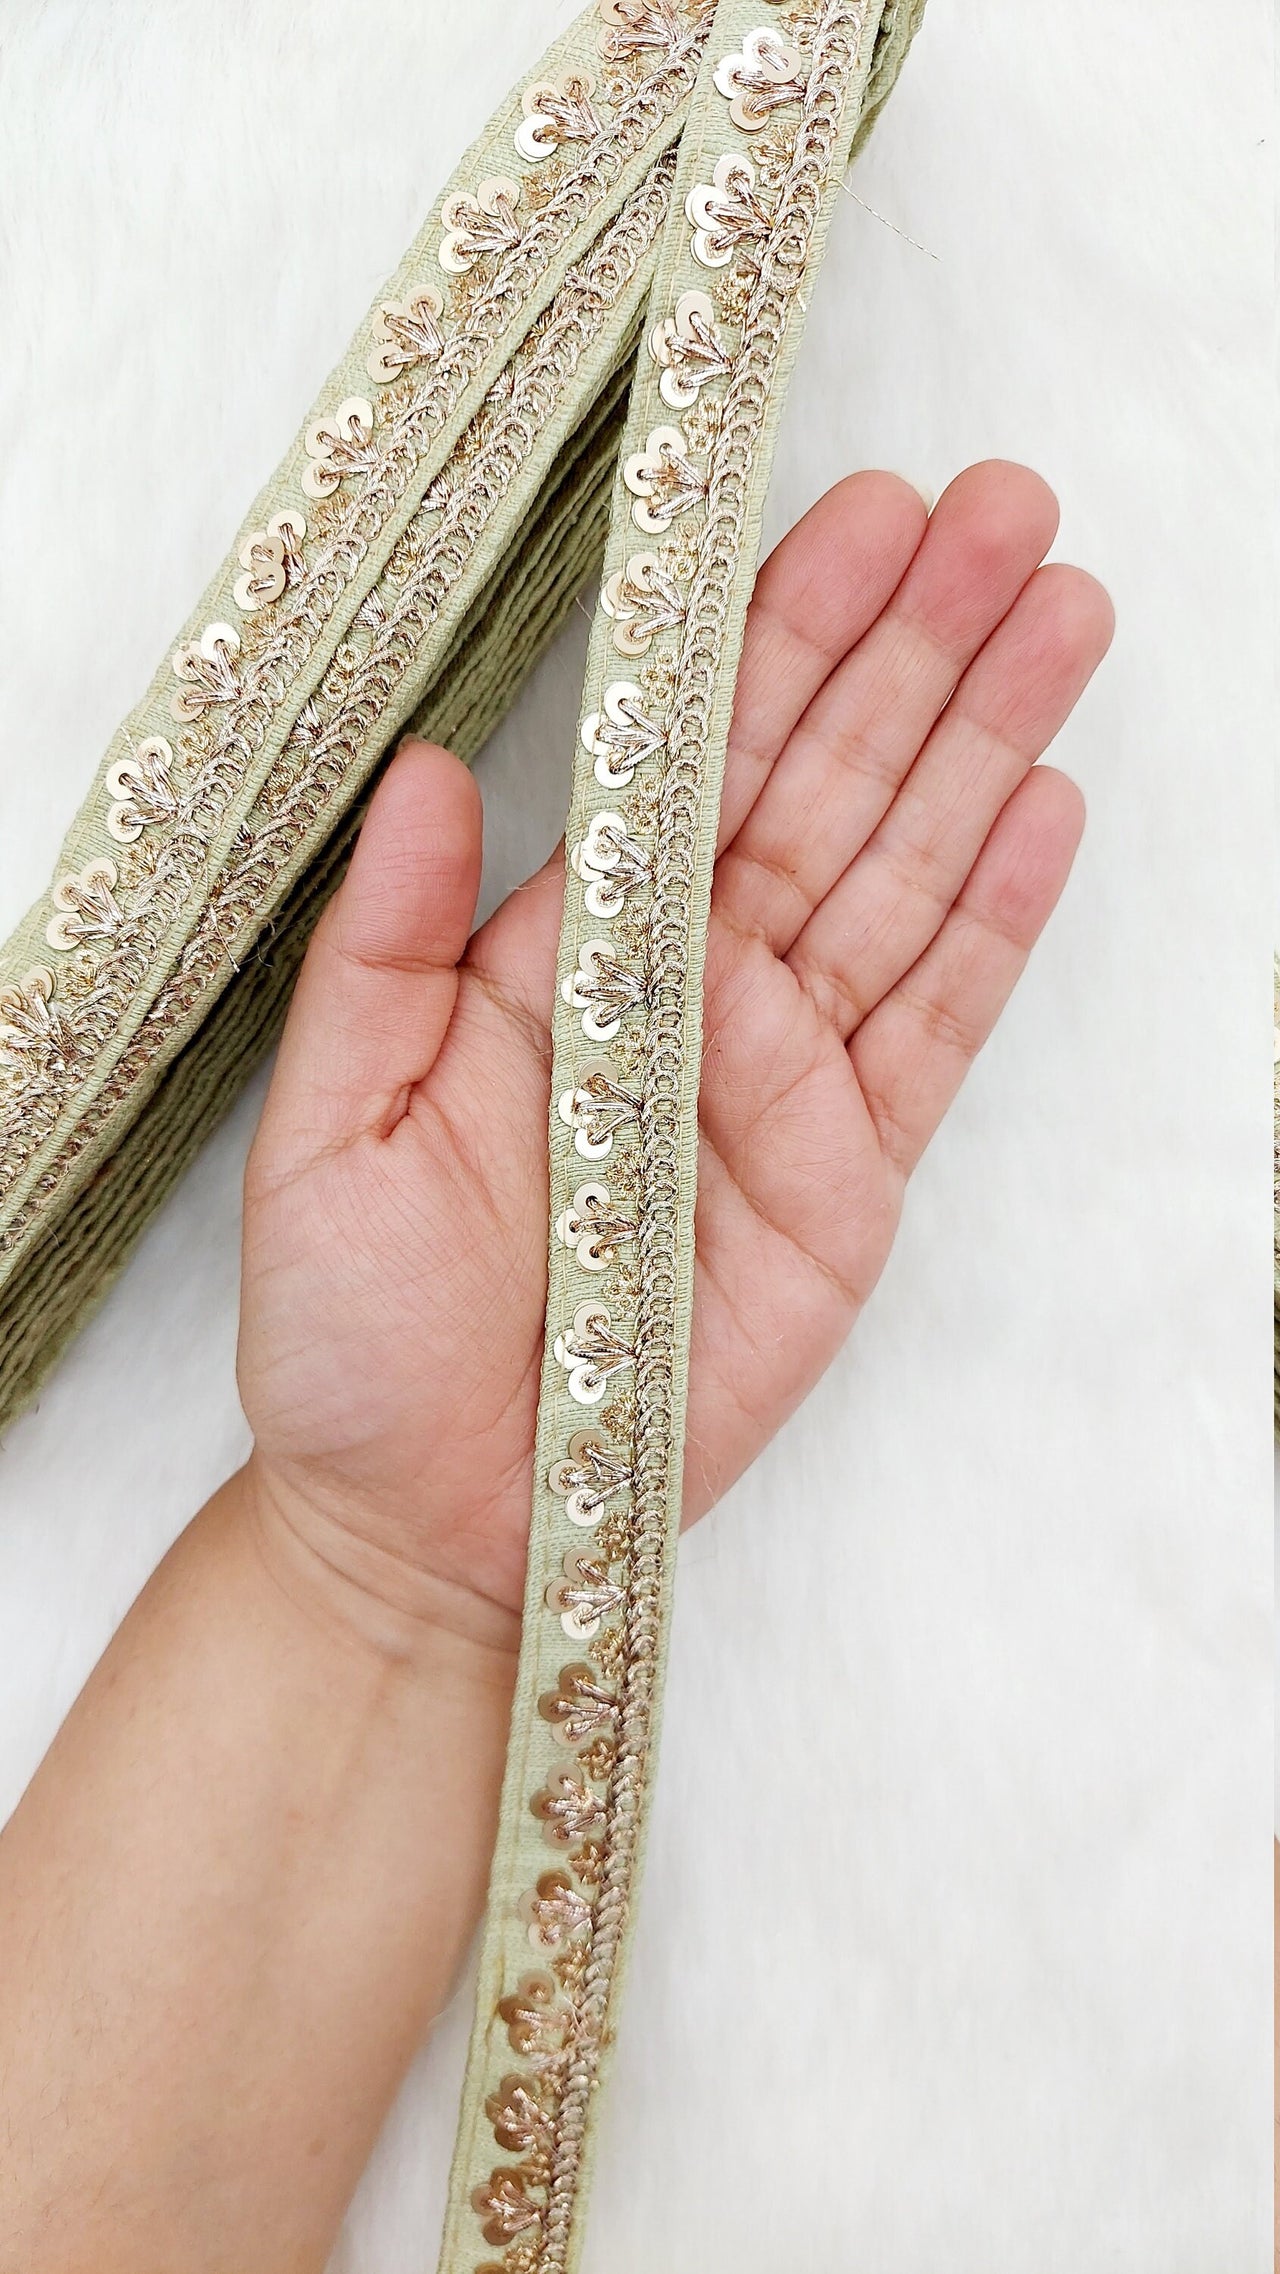 Art Silk Trim with Gold Embroidery and Sequins Indian Sari Border Trim By 3 Yards Decorative Trim Craft Lace